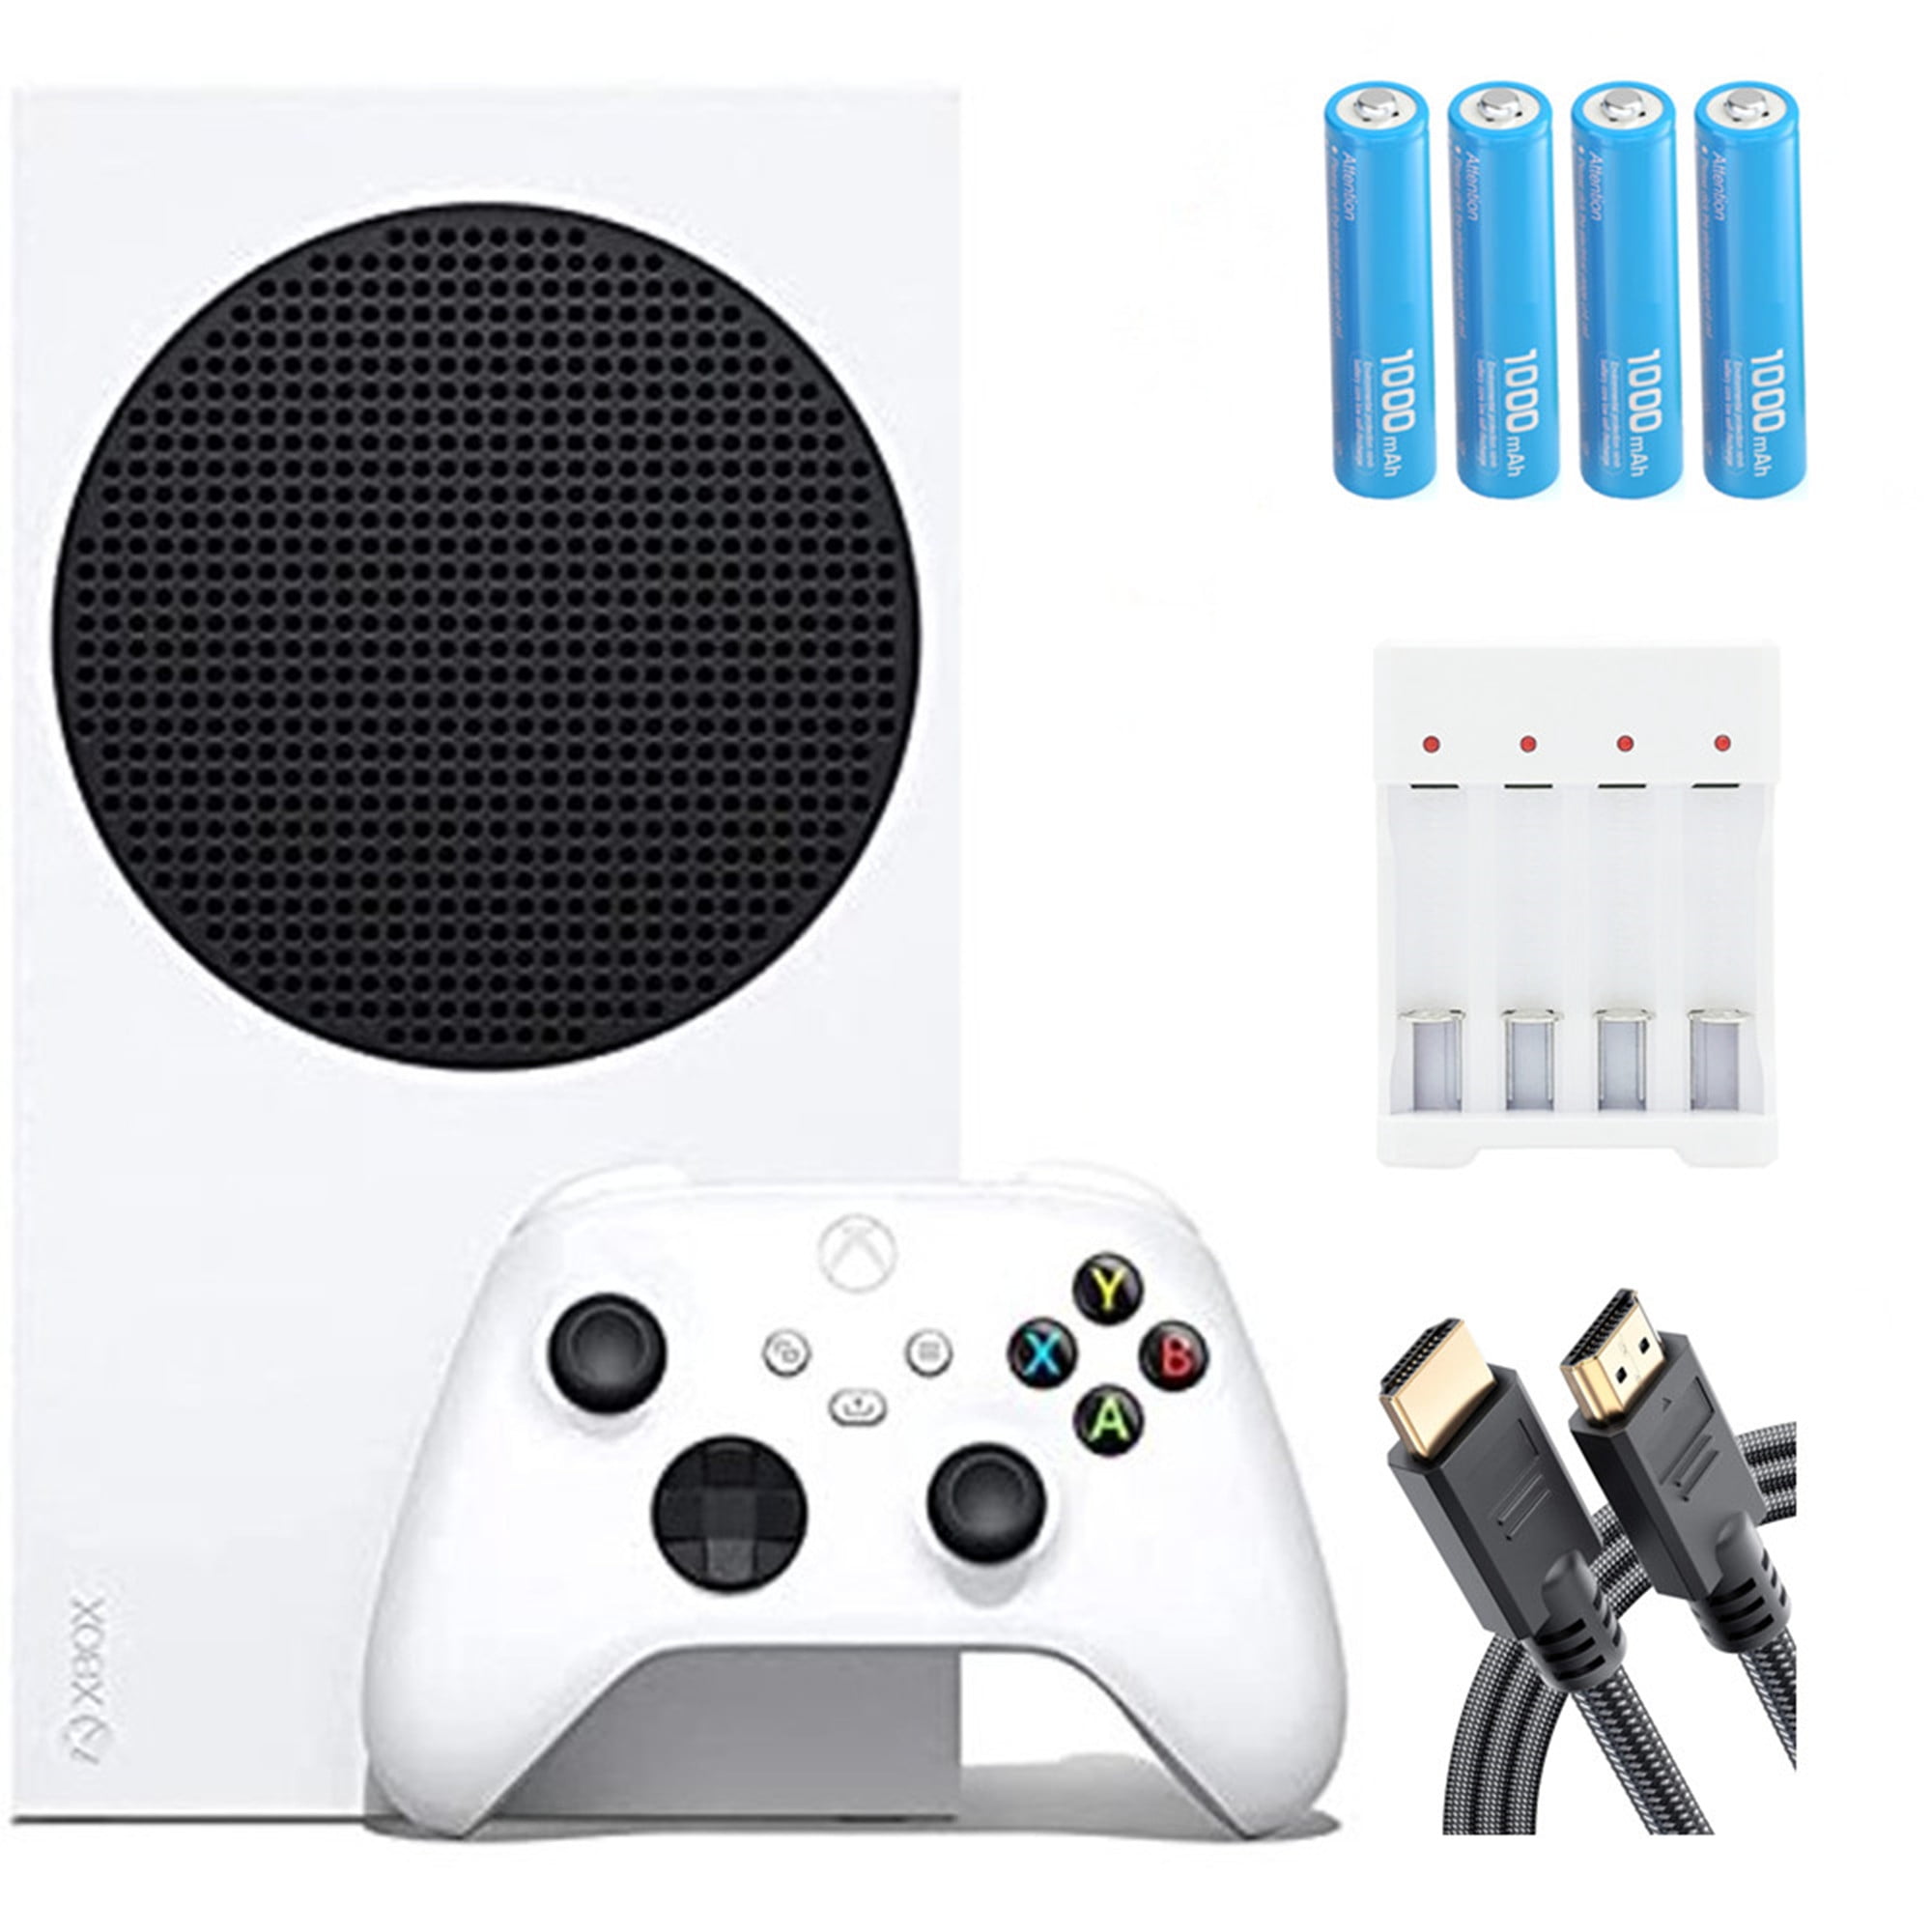 Microsoft Xbox Series S 512GB SSD Console White - Includes Xbox Wireless  Controller - Up to 120 frames per second - 10GB RAM 512GB SSD - Experience